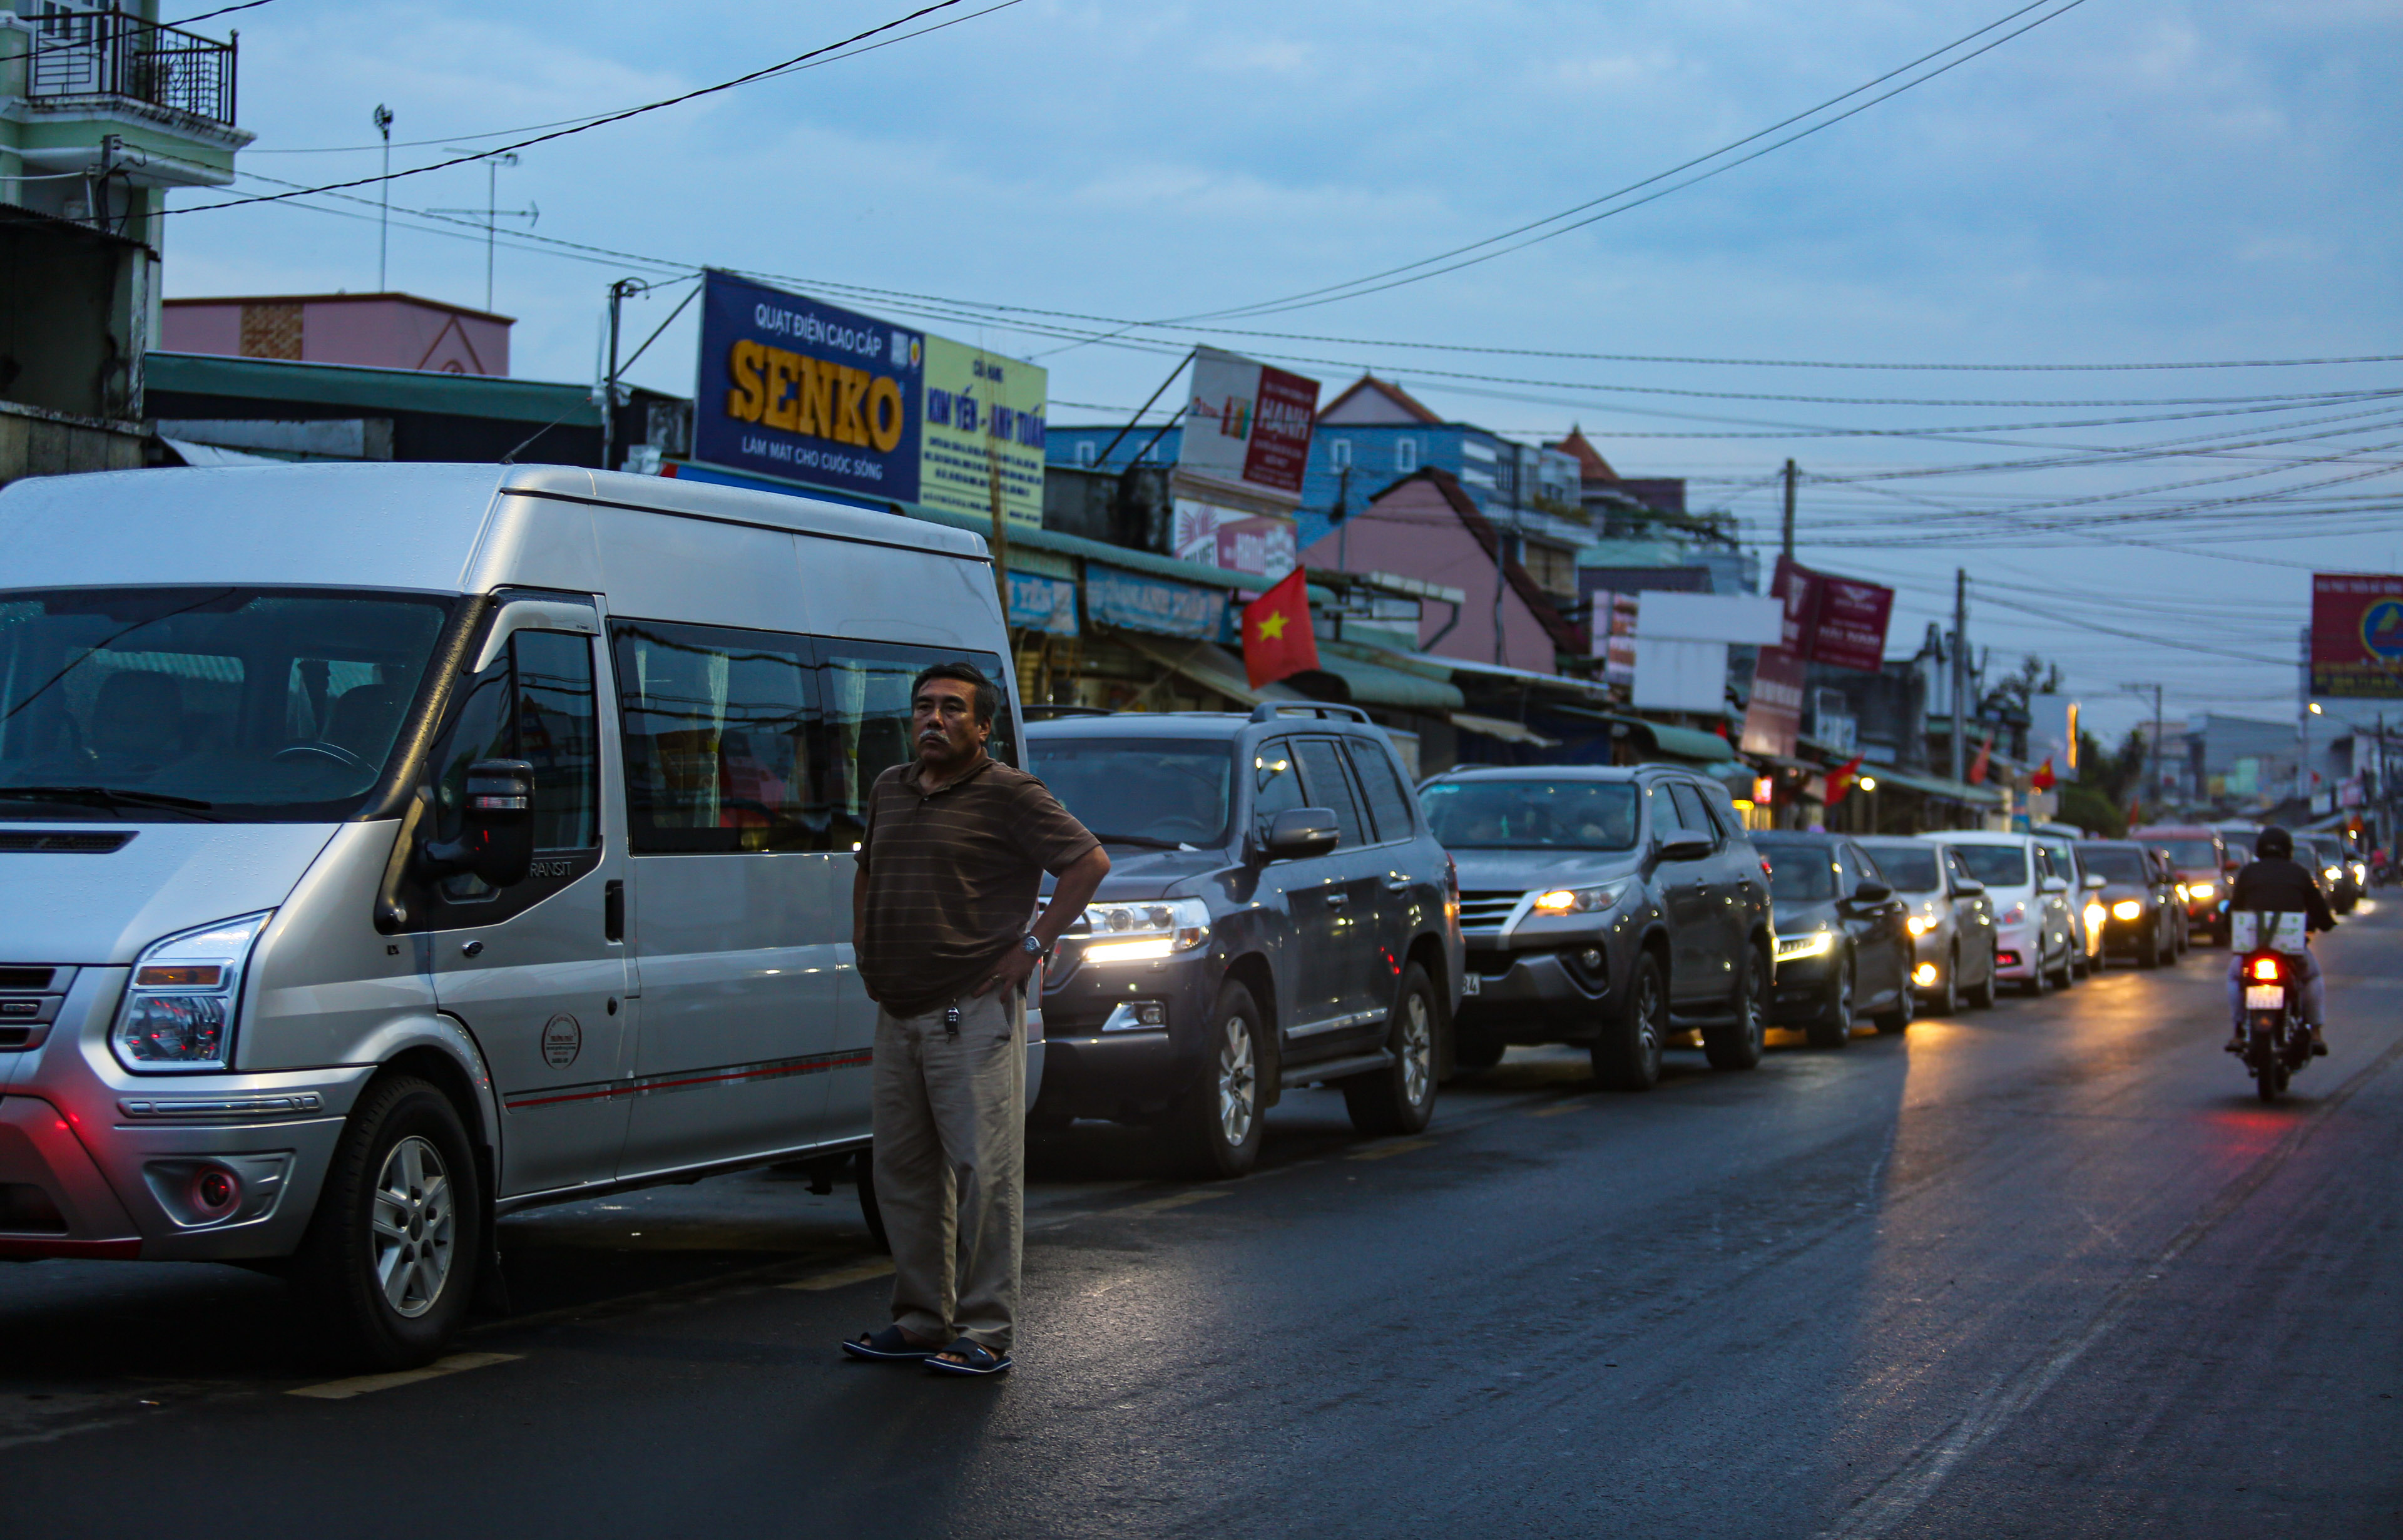 A driver gets out of his van to see the line of automobiles waiting to get on the Cat Lai Ferry on Ly Thai To Street in Dong Nai Province, Vietnam, January 2, 2023. Photo: Chau Tuan / Tuoi Tre